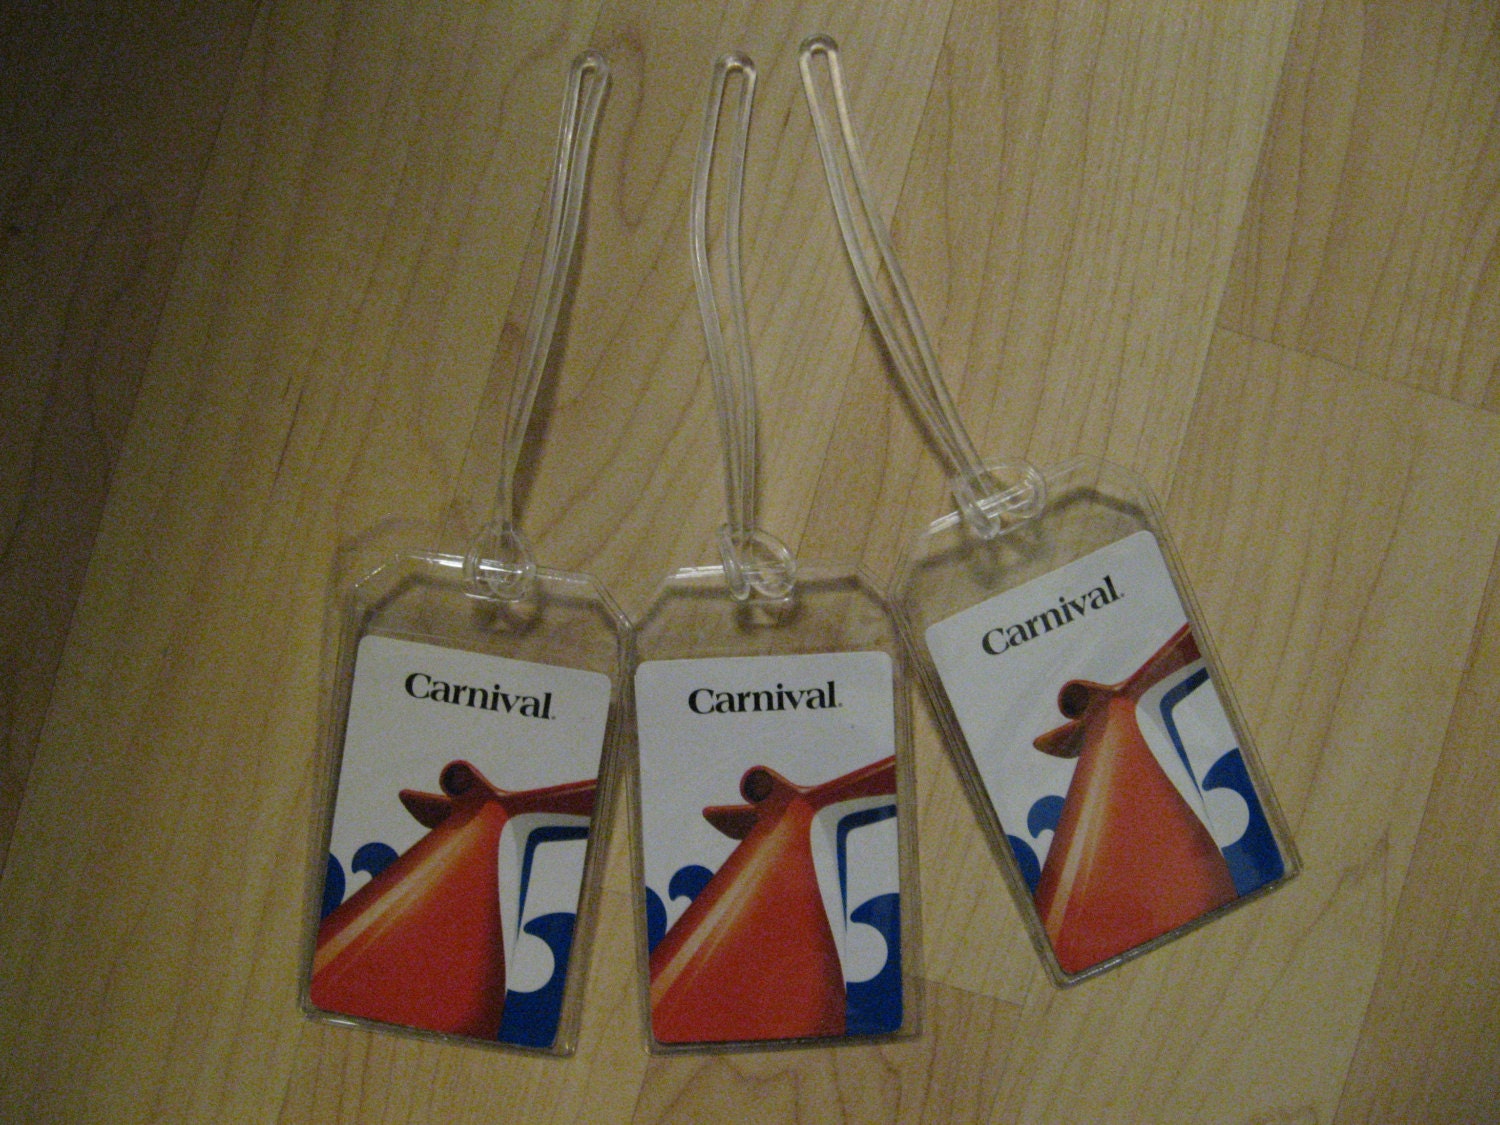 carnival-luggage-tags-cruise-lines-repurposed-playing-cards